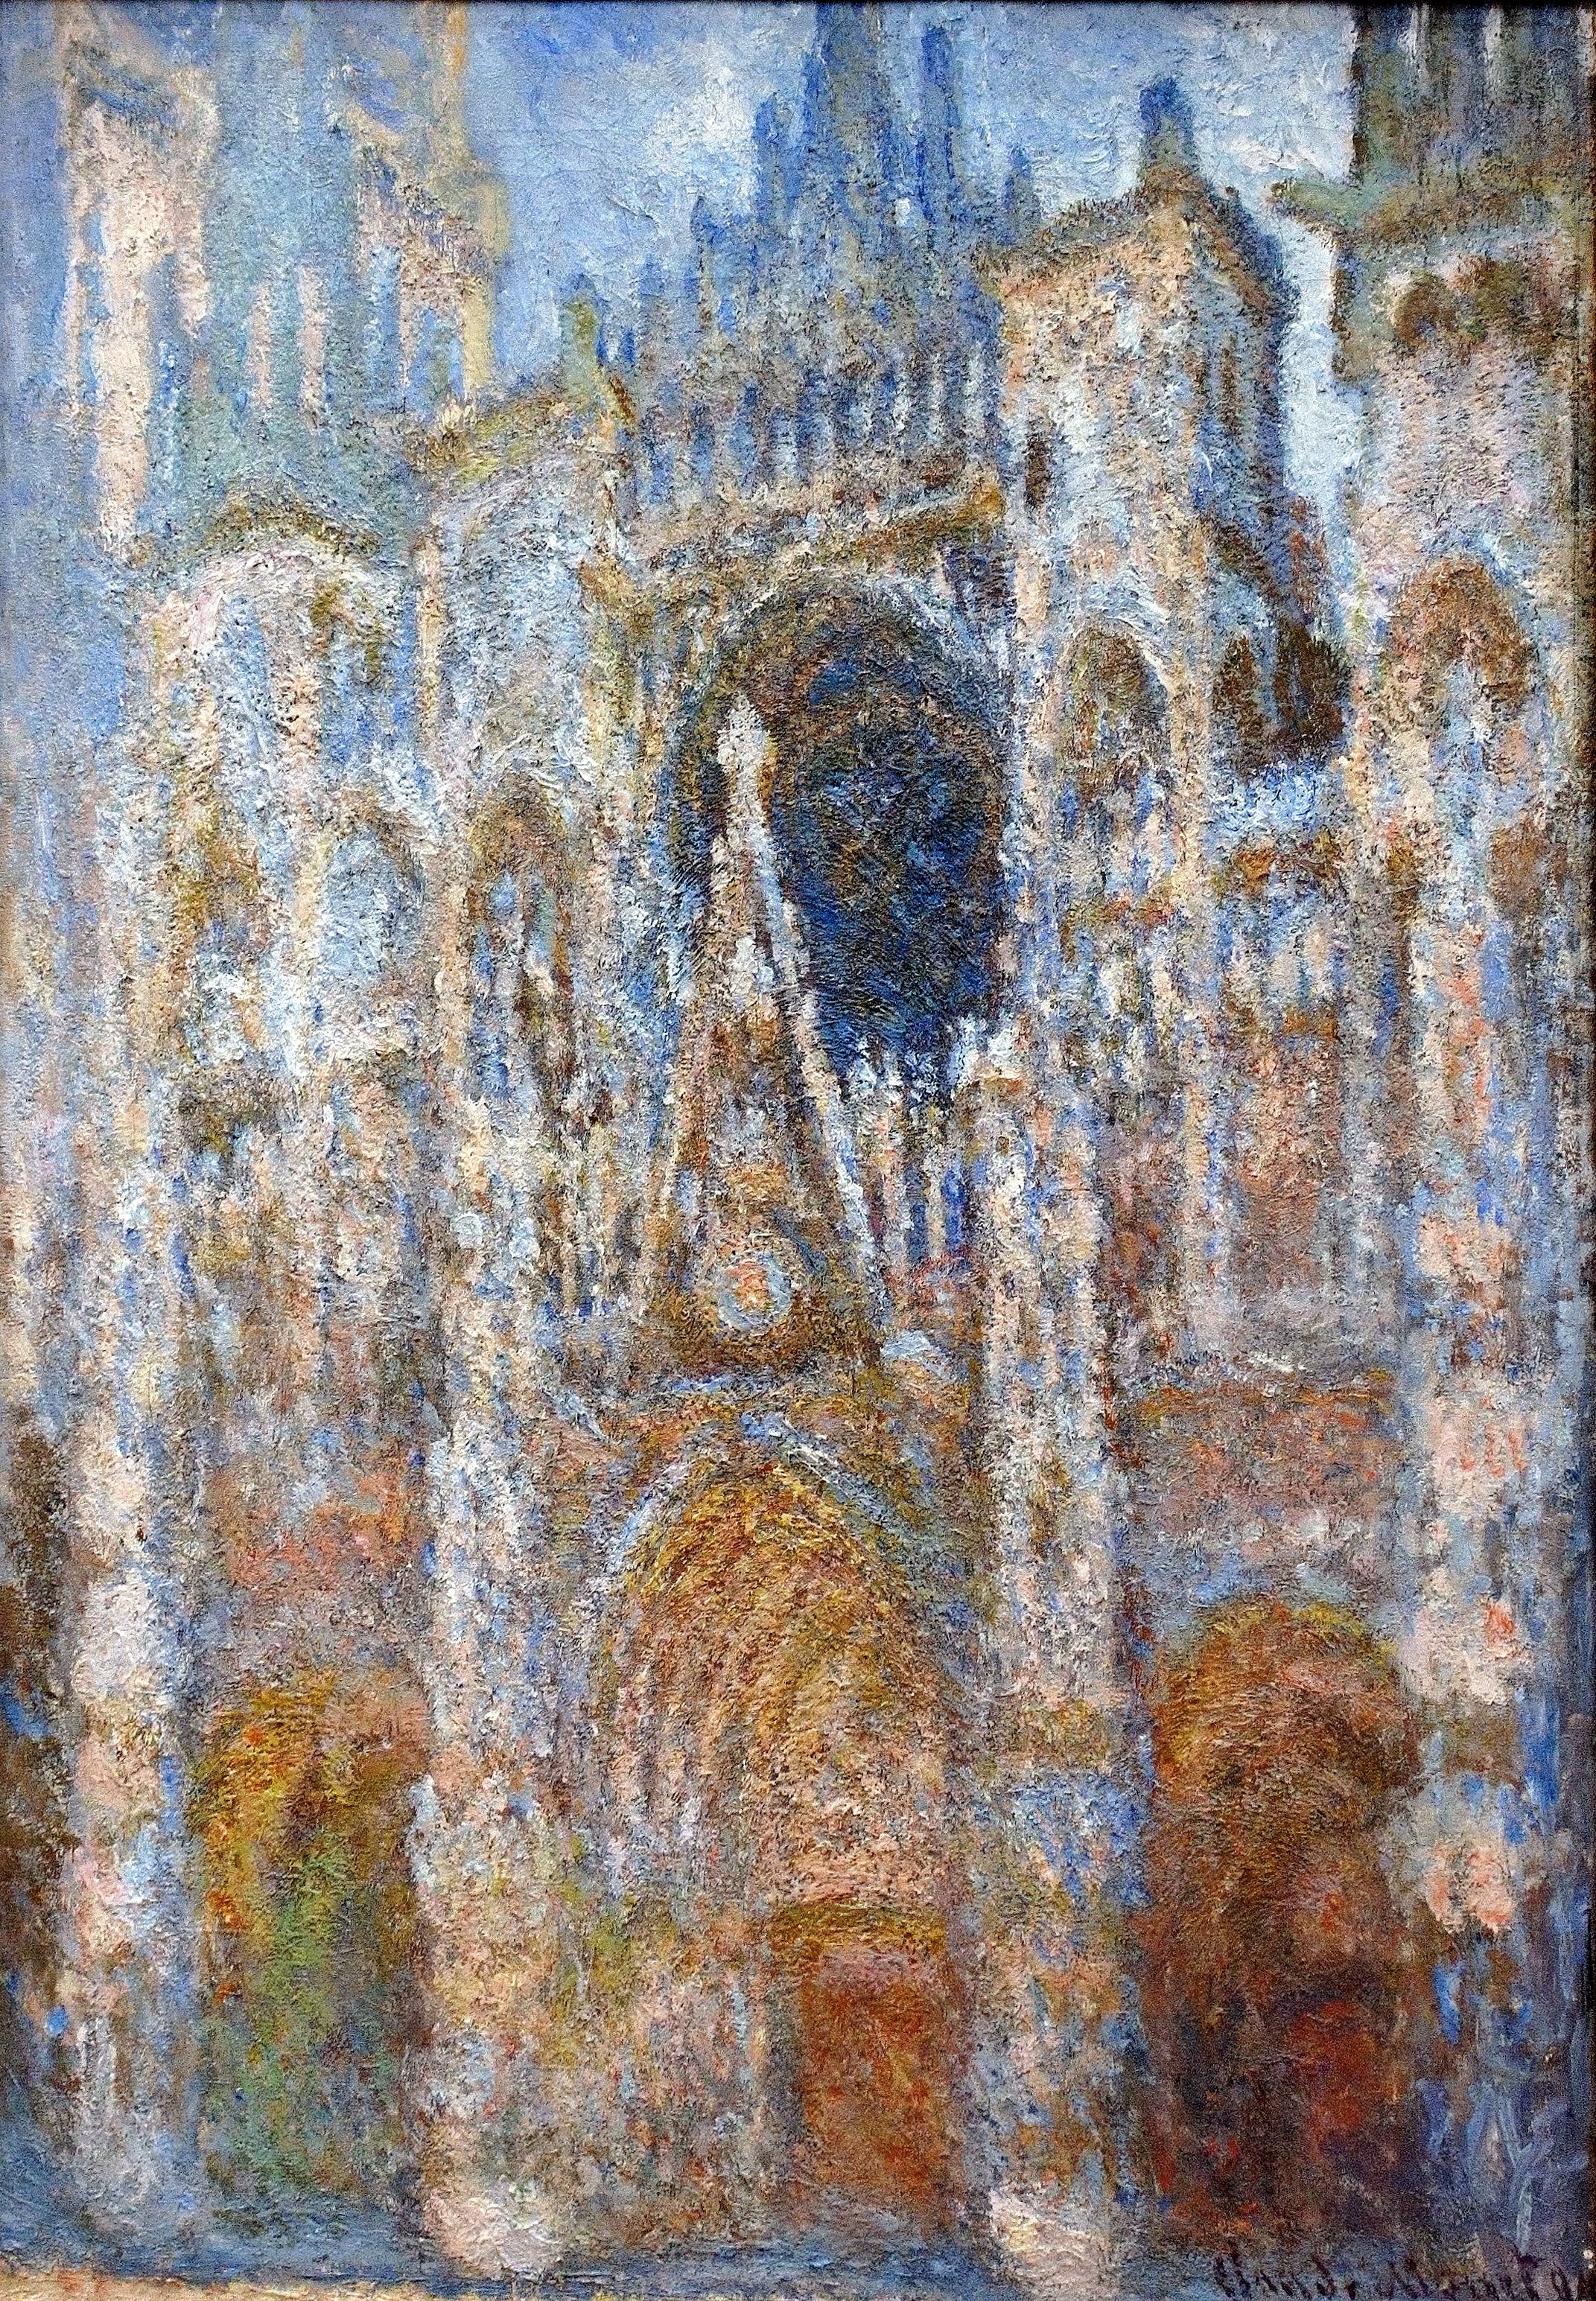 https://uploads3.wikiart.org/images/claude-monet/rouen-cathedral-magic-in-blue.jpg